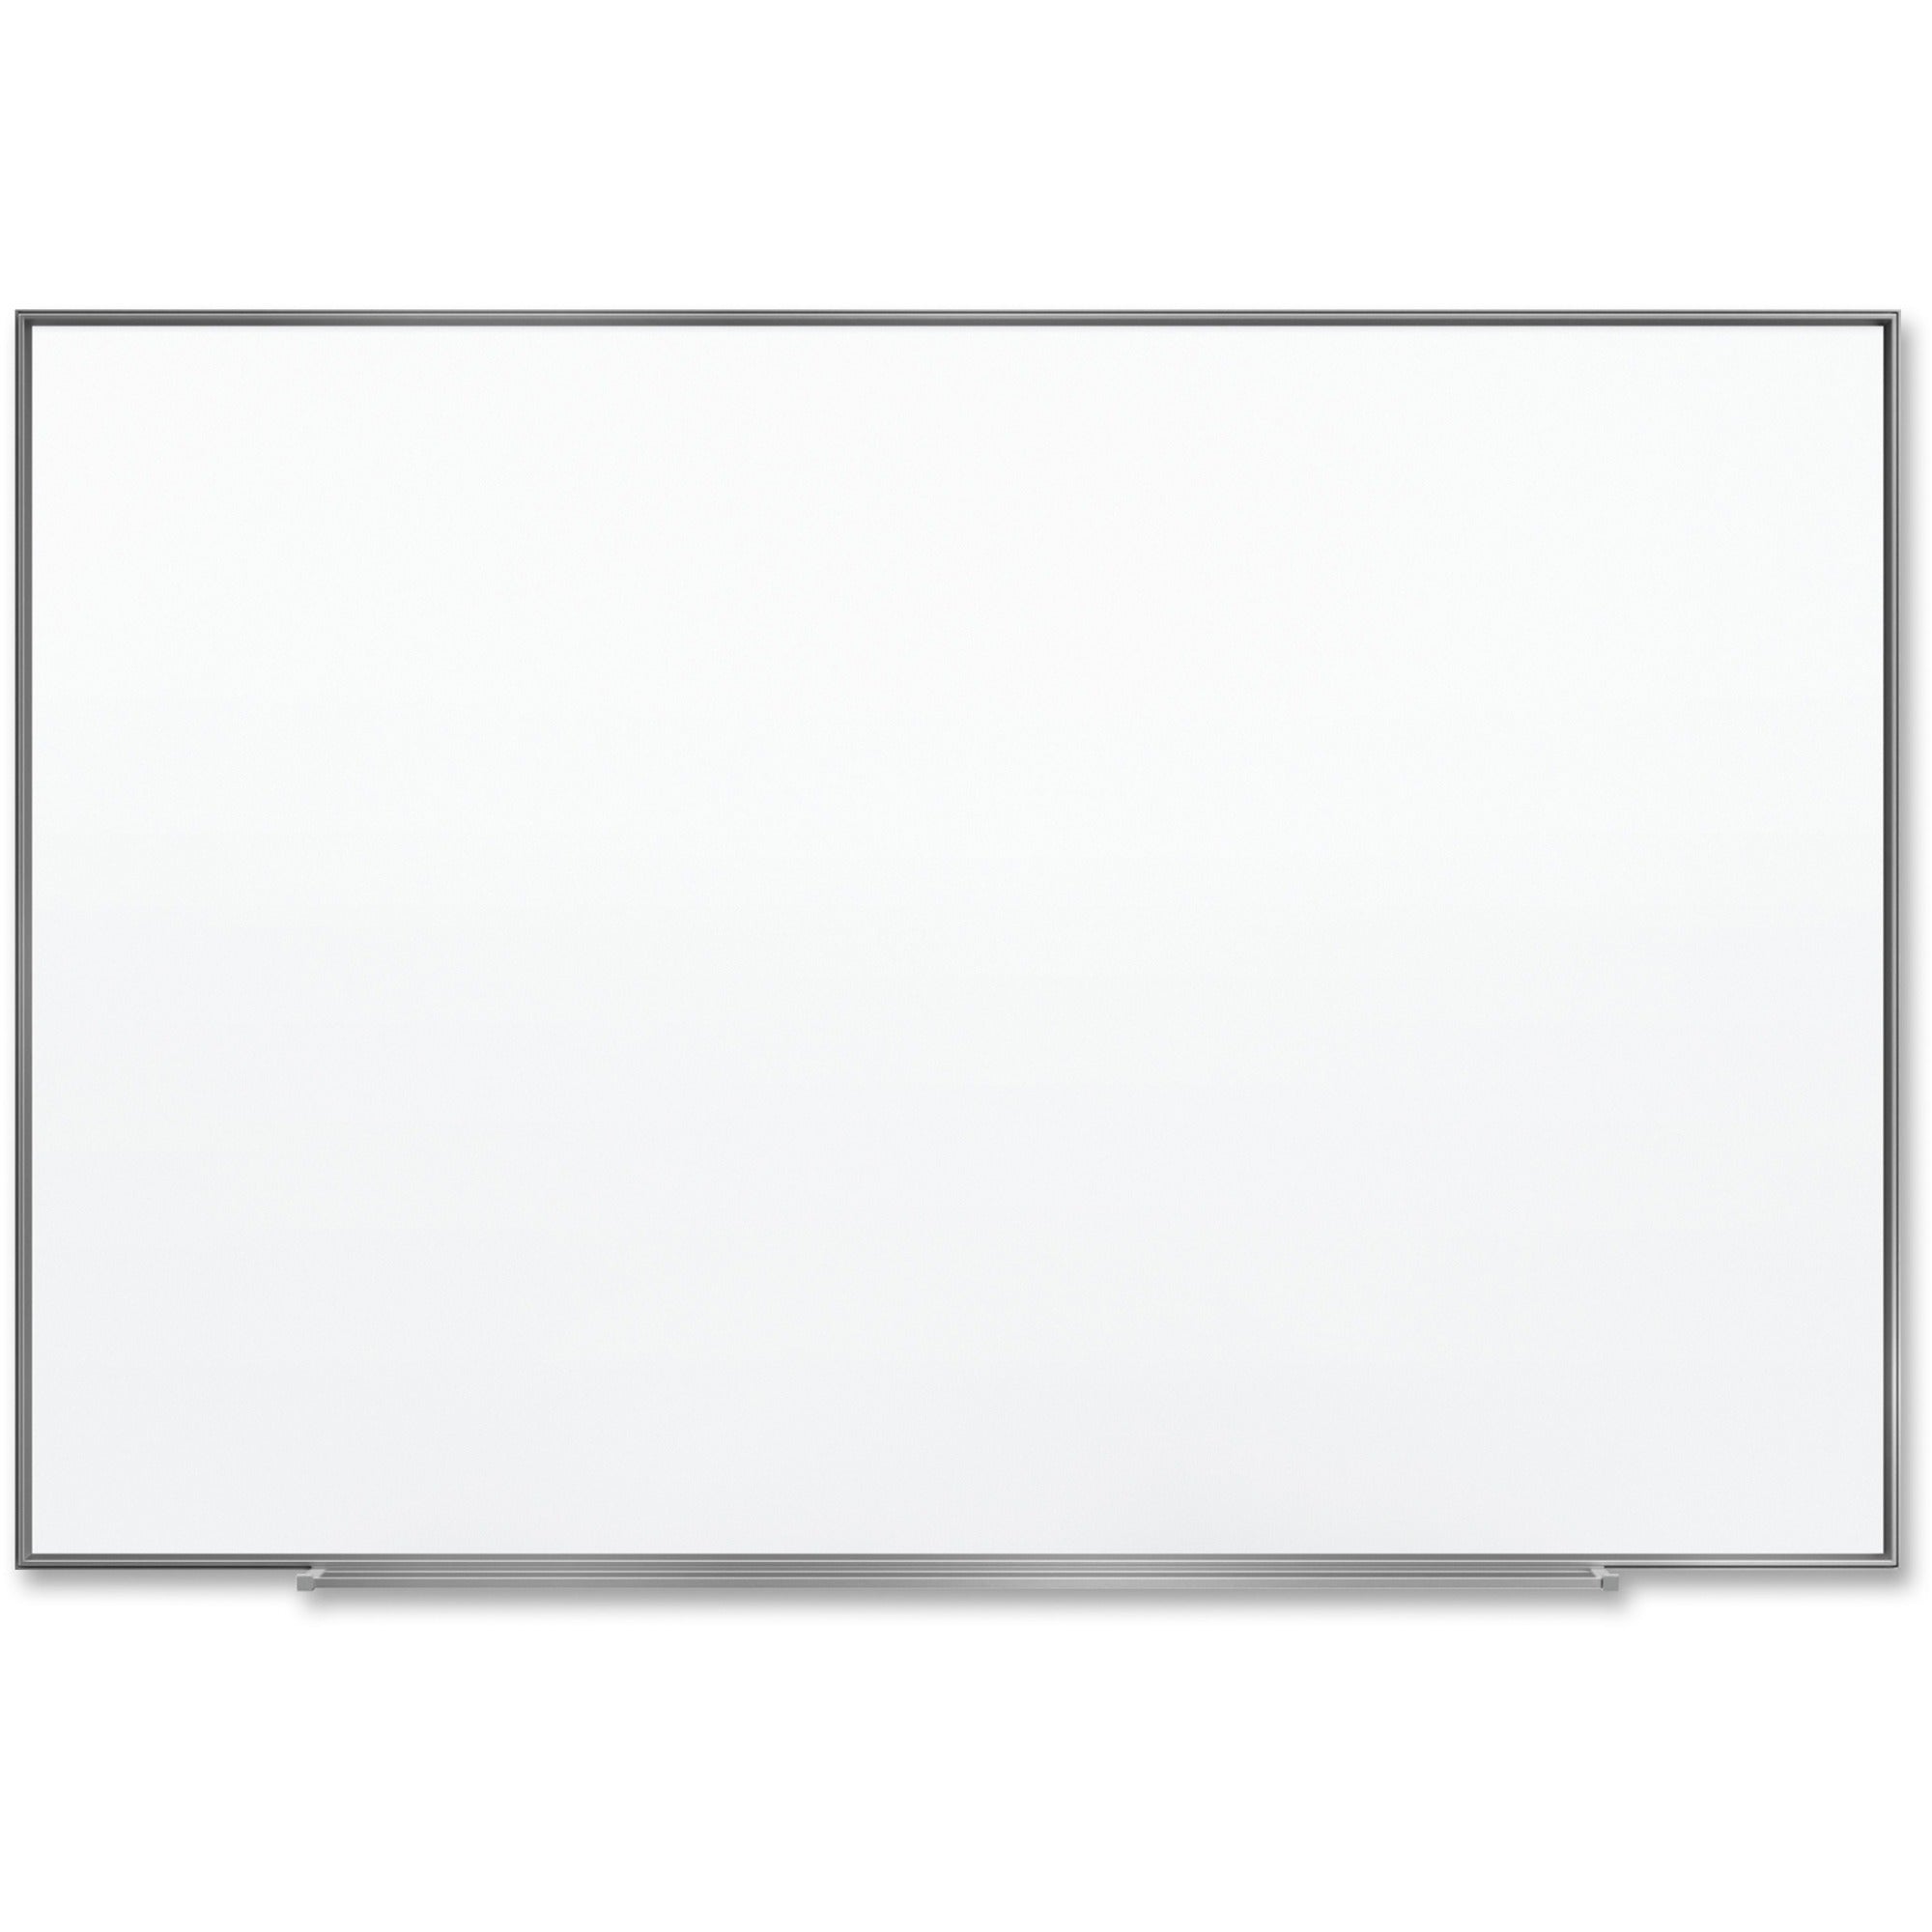 quartet-fusion-nano-clean-magnetic-dry-erase-board-36-3-ft-width-x-24-2-ft-height-white-surface-silver-aluminum-frame-horizontal-vertical-magnetic-1-each_qrtna3624f - 1